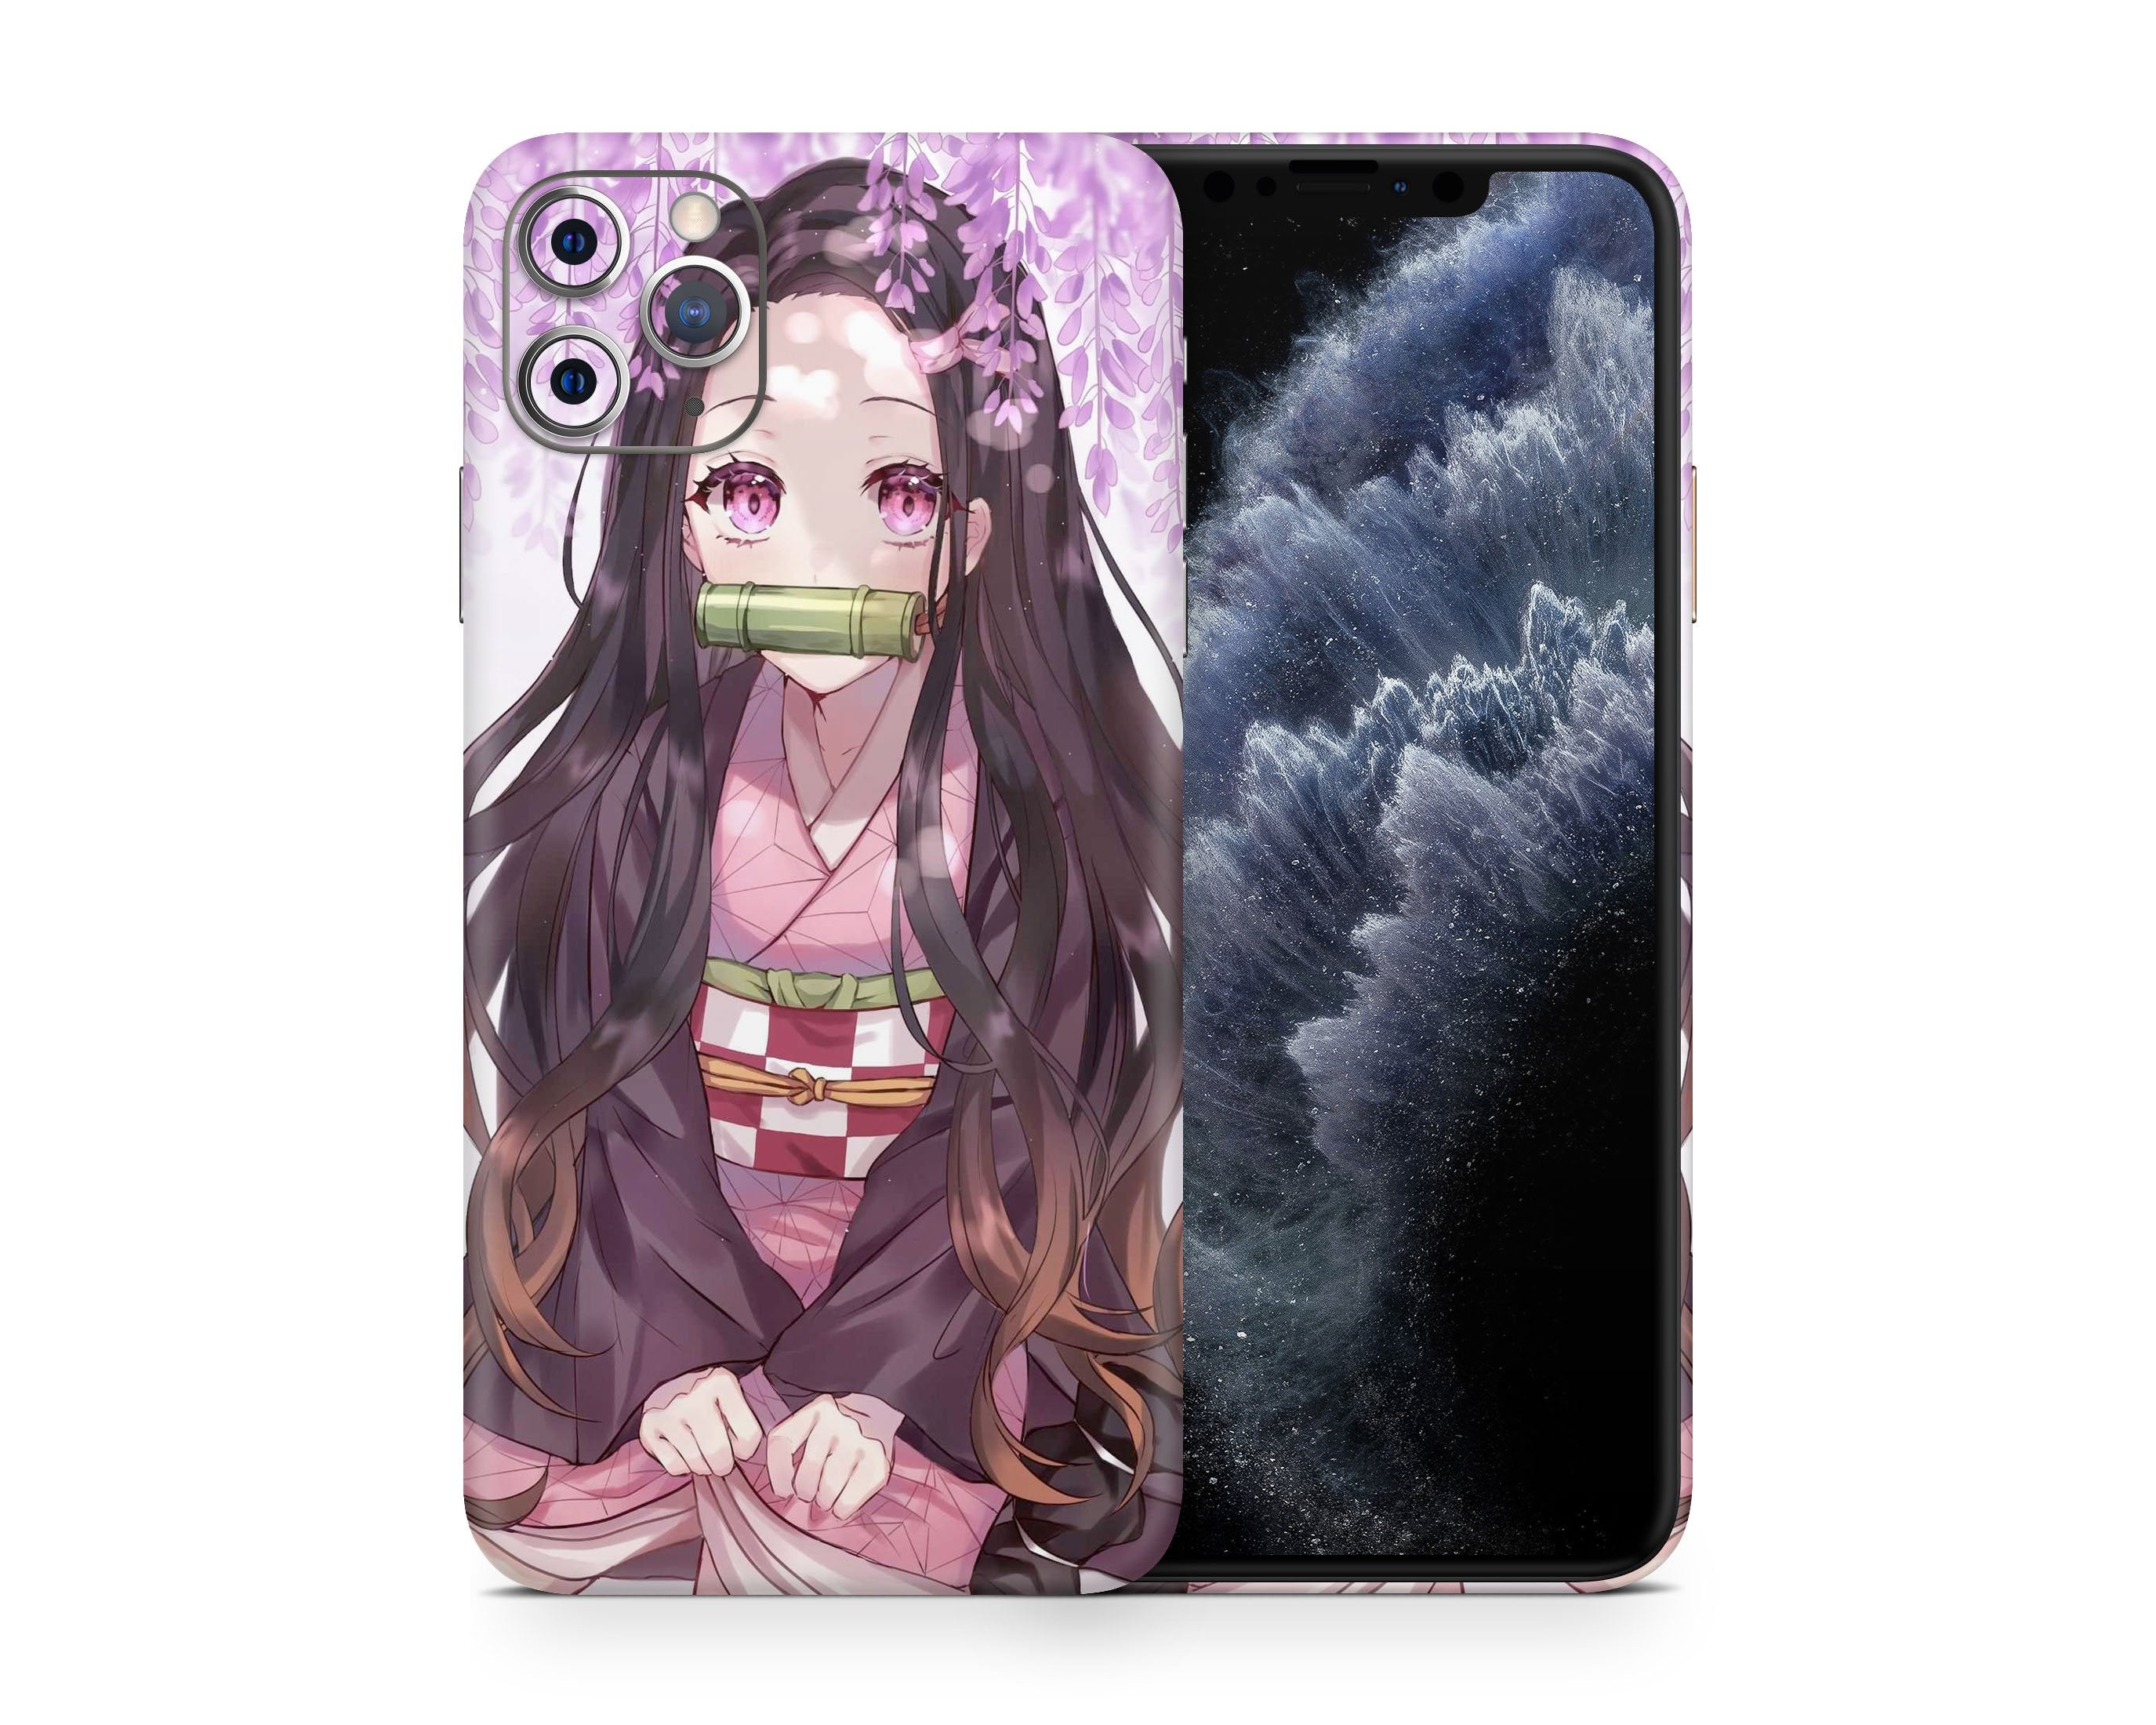 PostersSkinsAnimeCases on Instagram Ghost Town available for  absolutely any device We also do customizable phone skins for any model   Get yourselves a free Ghost Town